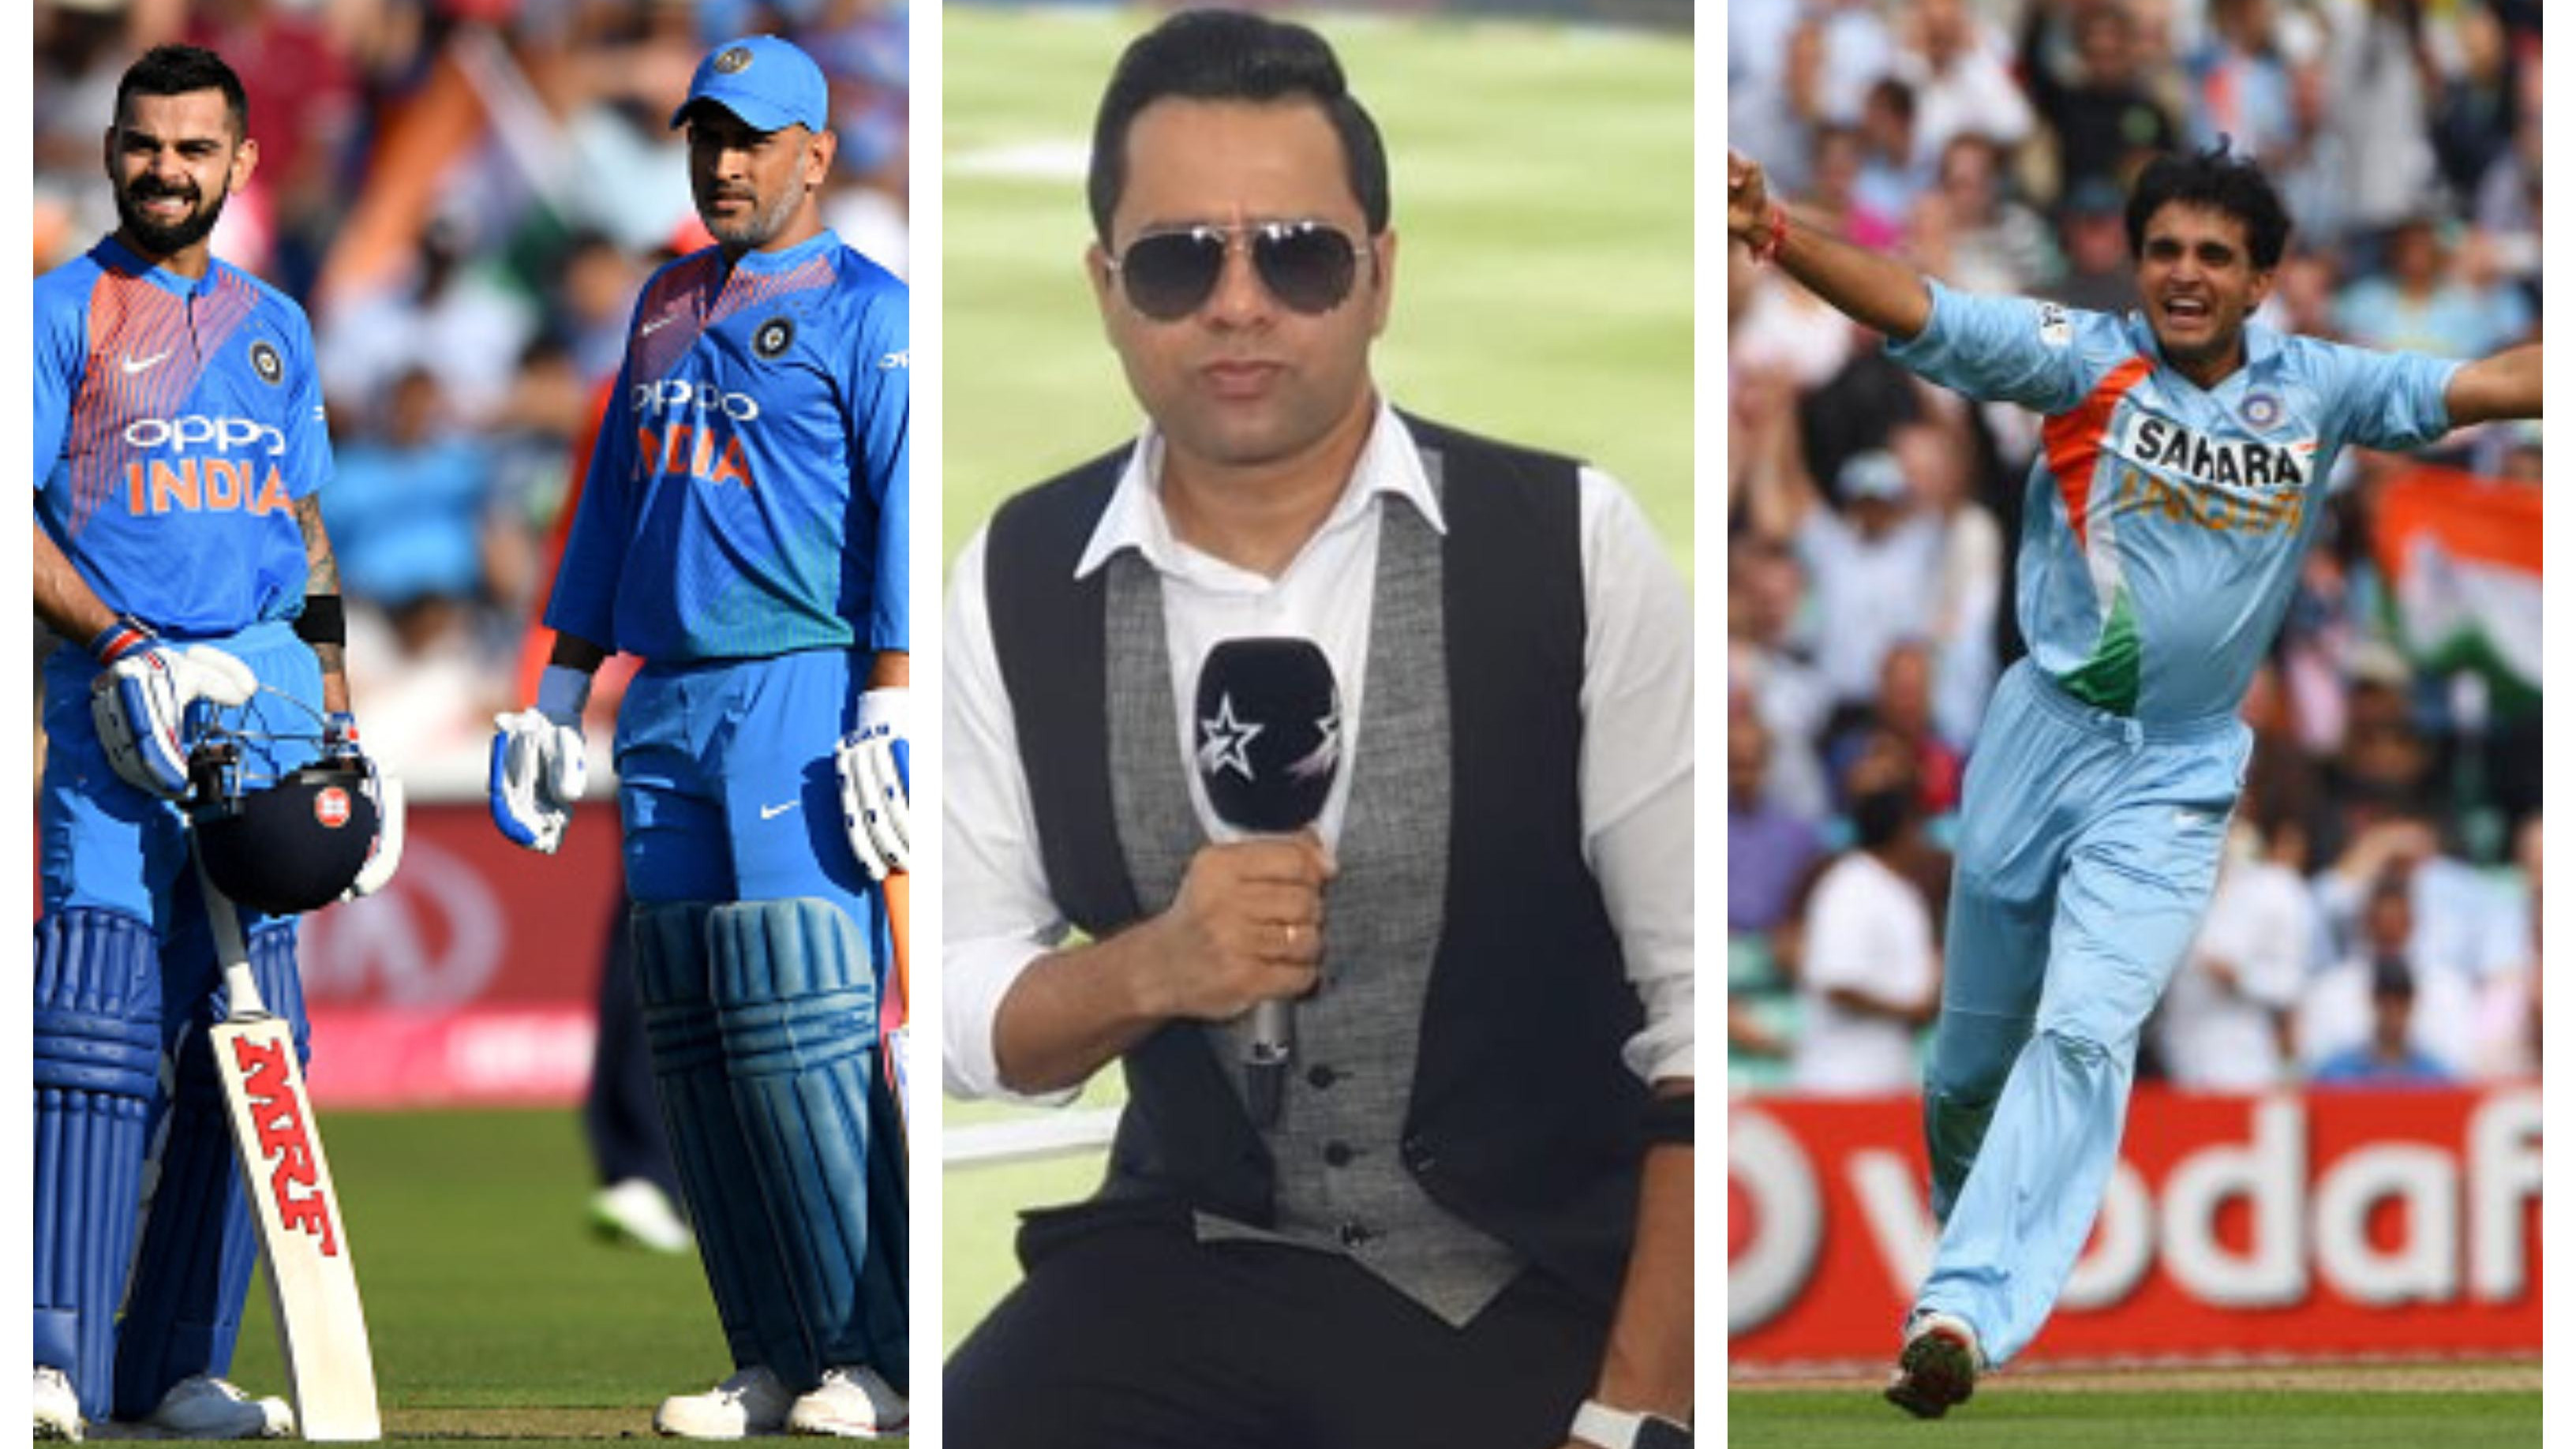 Aakash Chopra has his say on the captain who revolutionized Indian cricket